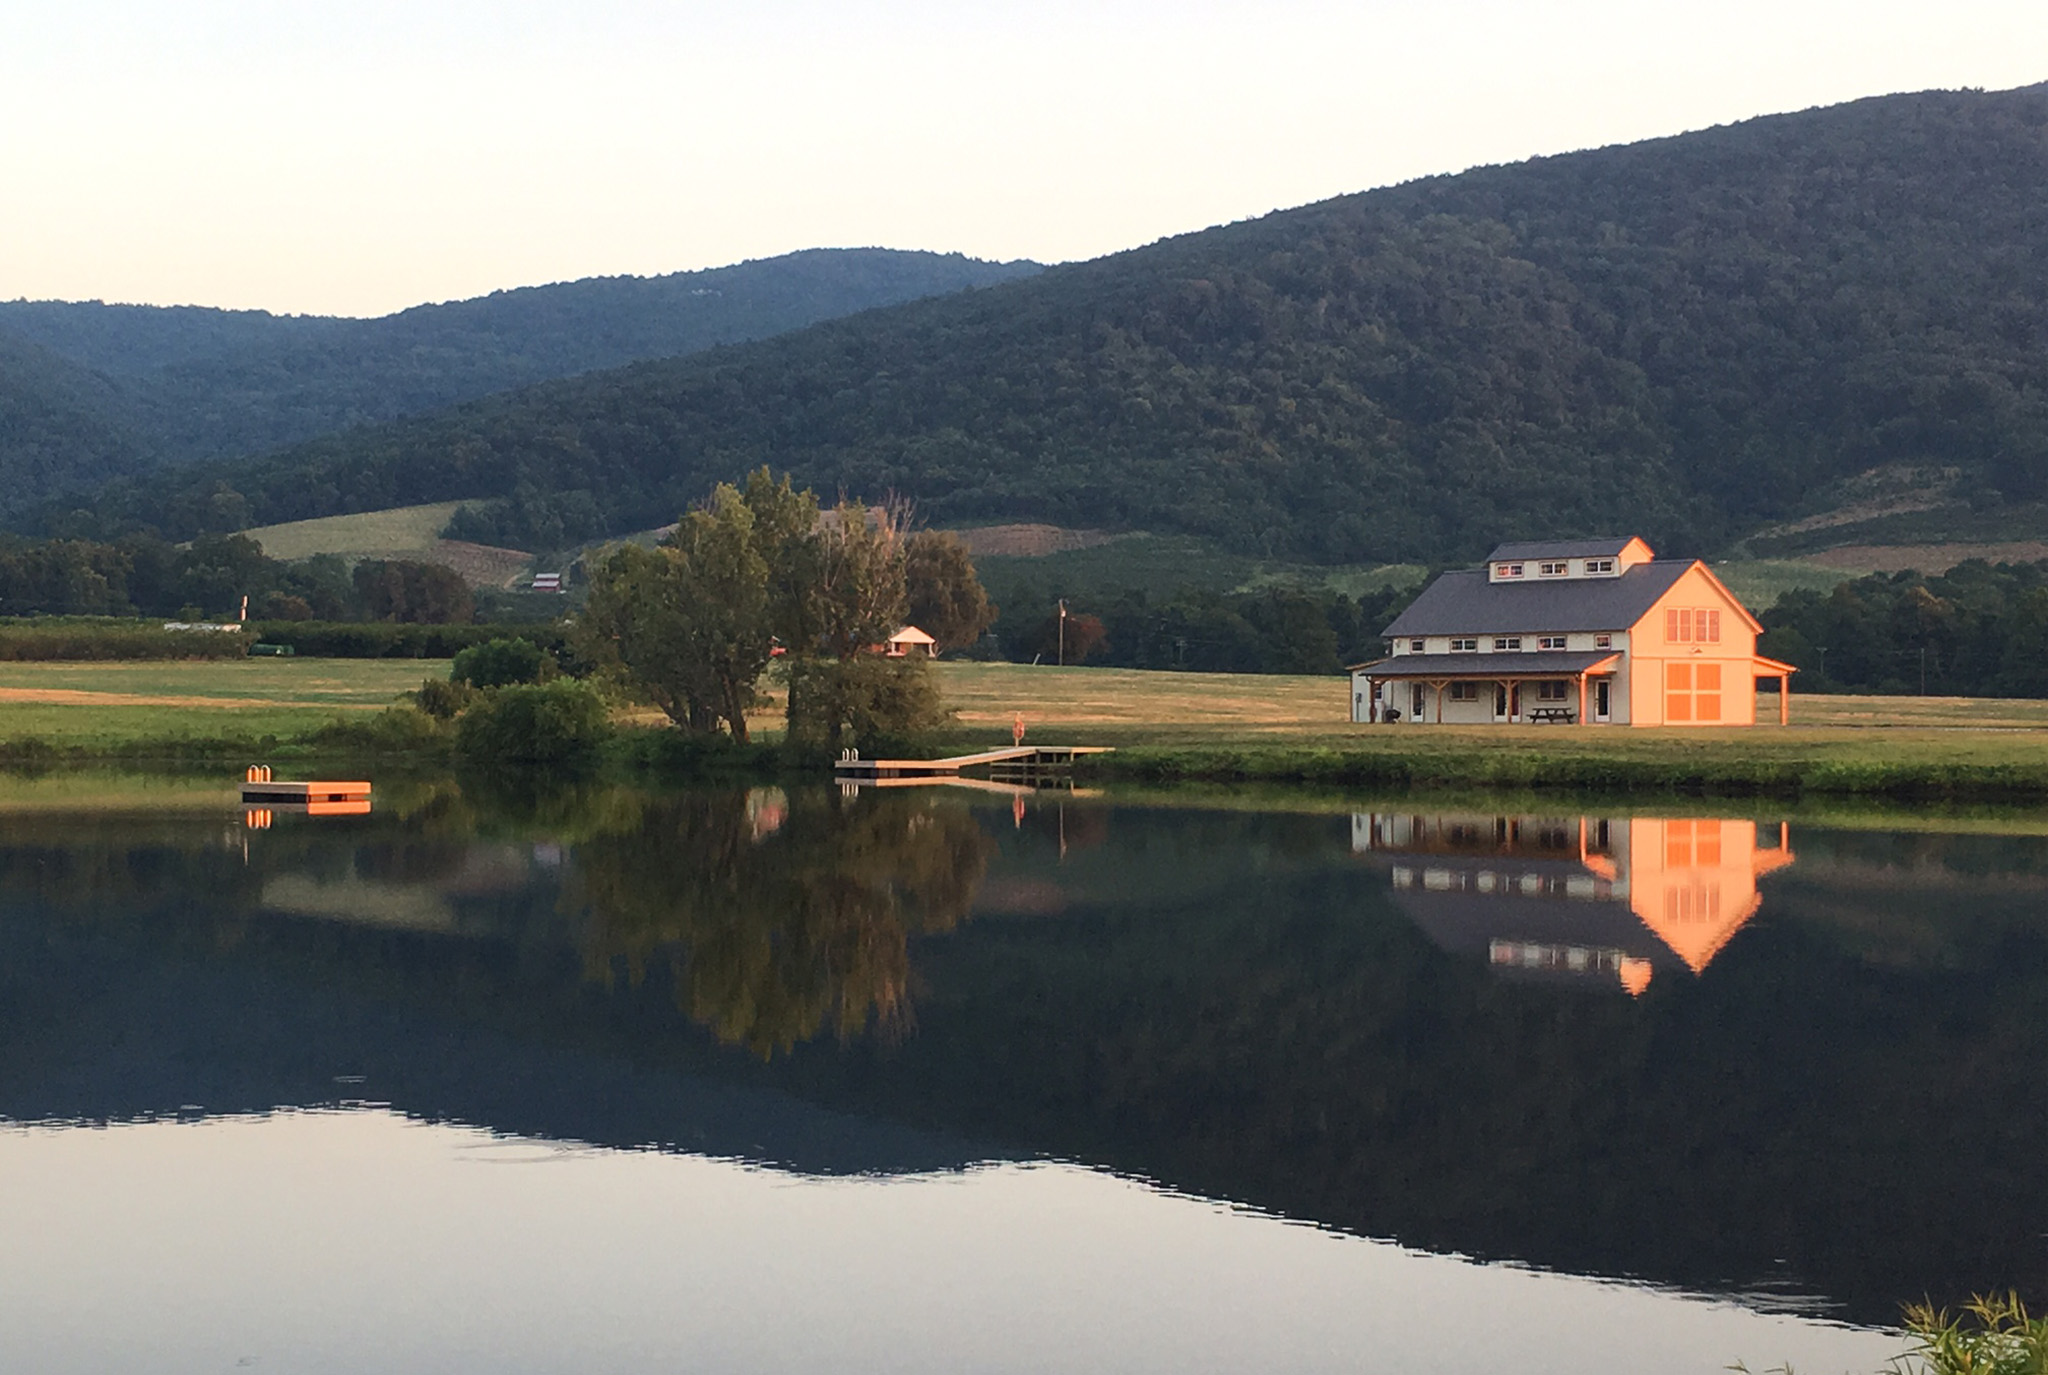 A picture of the Farm Church Barn, designed and built by Geobarns, beside a calm lake with Virginia mountains in the background.